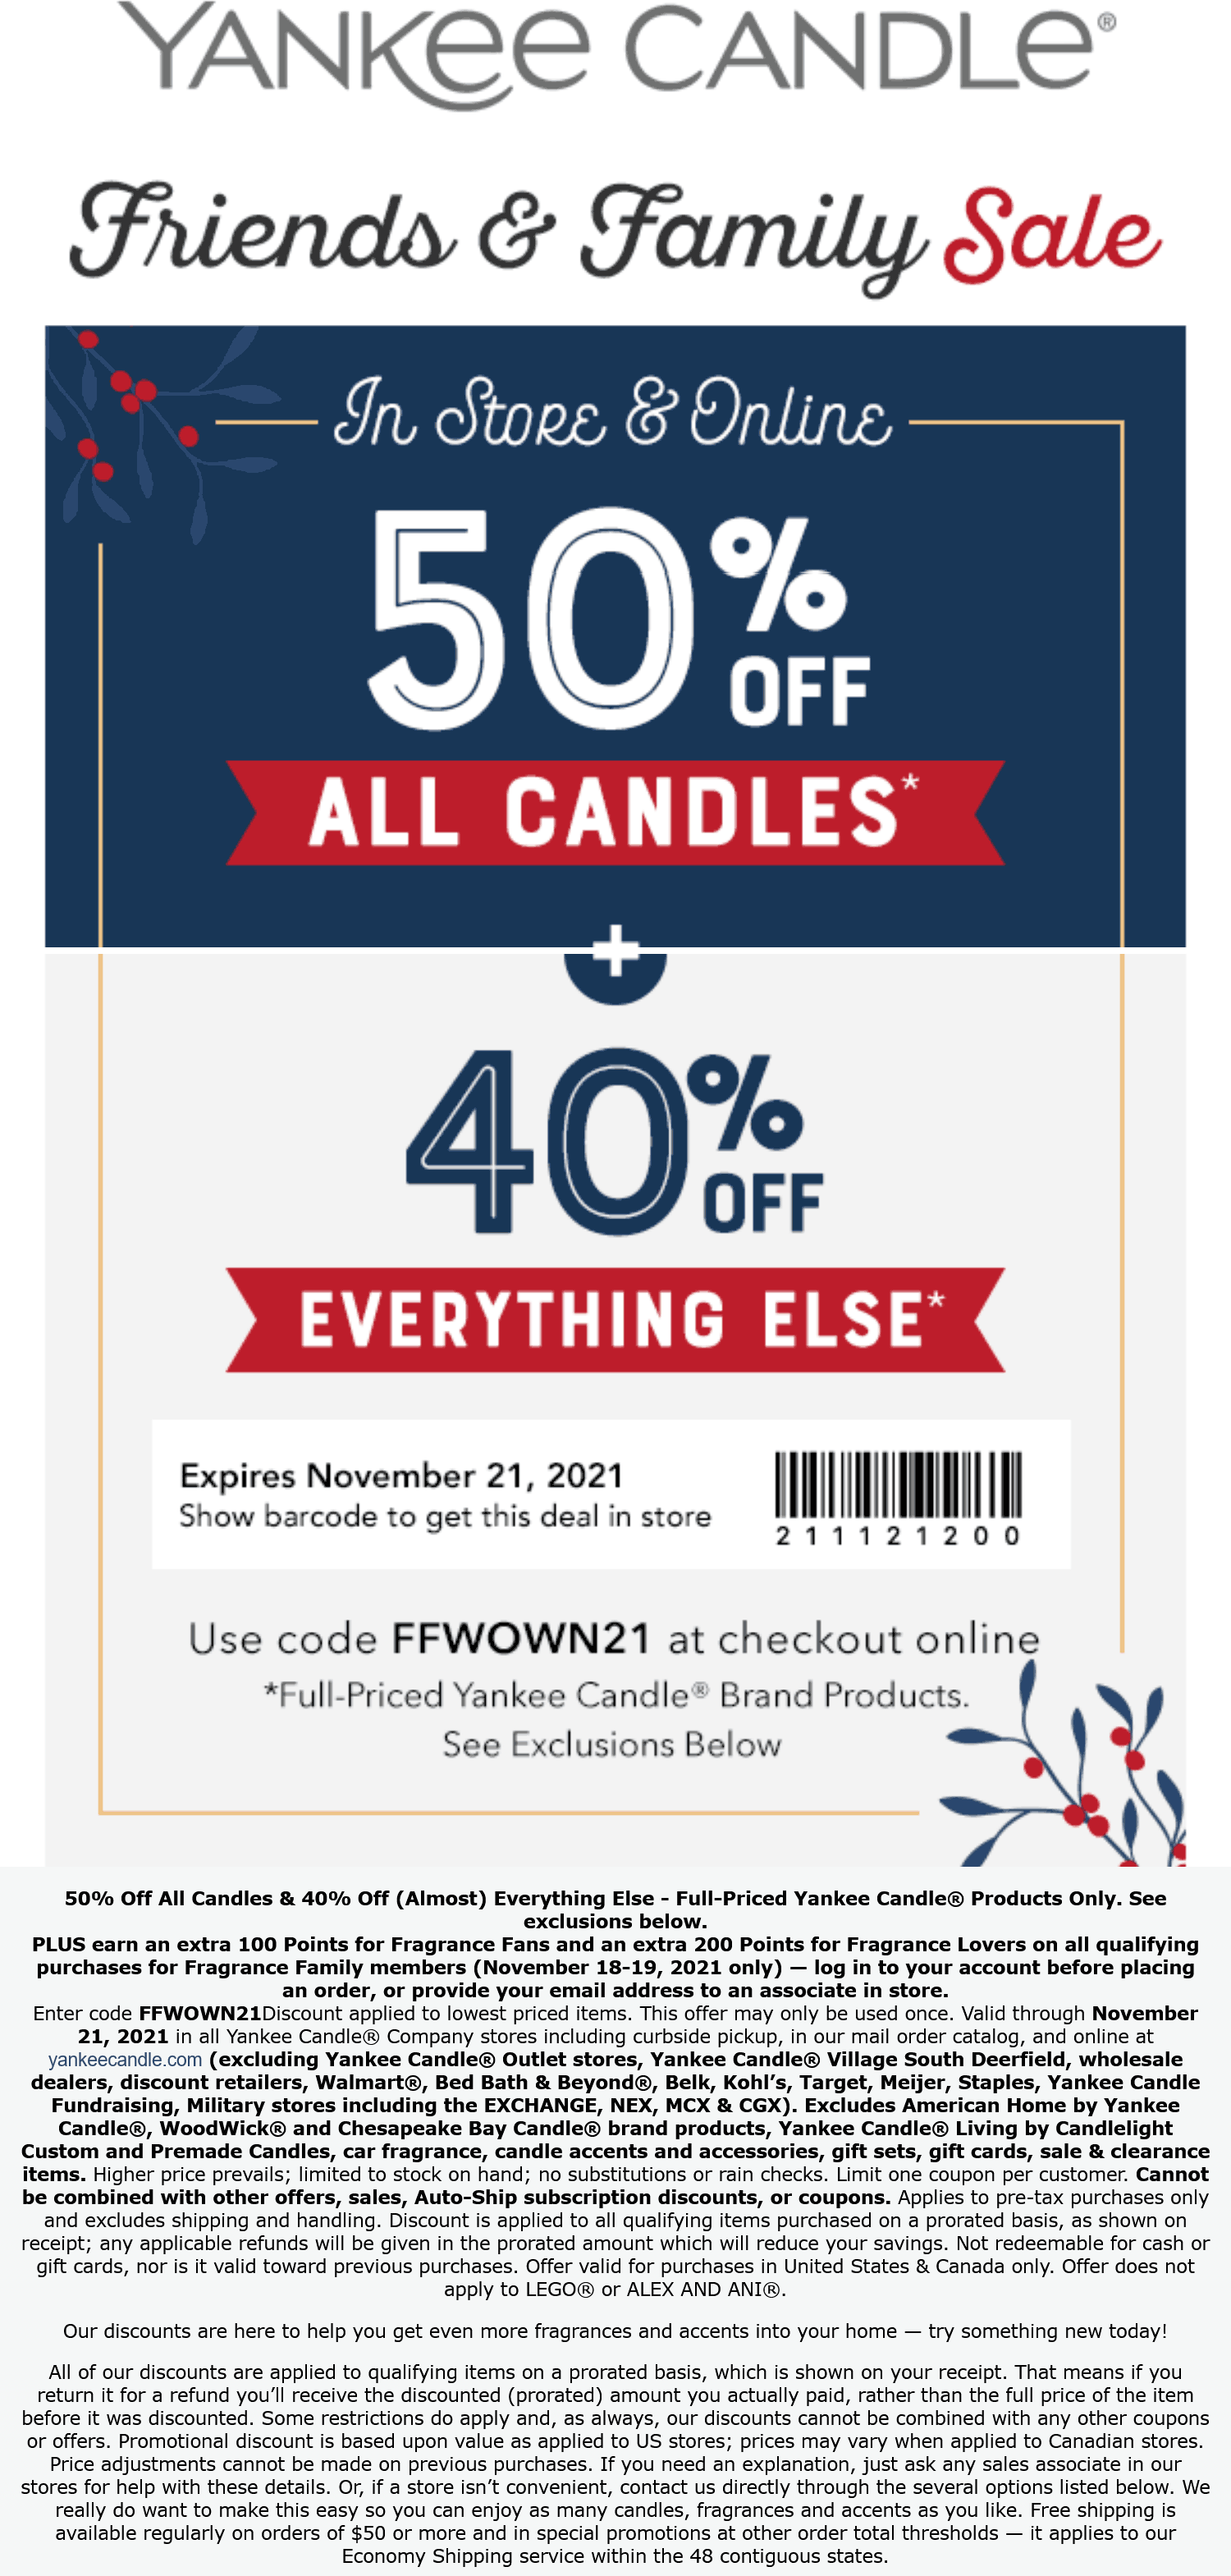 Yankee Candle stores Coupon  50% off all candles & 40% everything else at Yankee Candle, or online via promo code FFWOWN21 #yankeecandle 